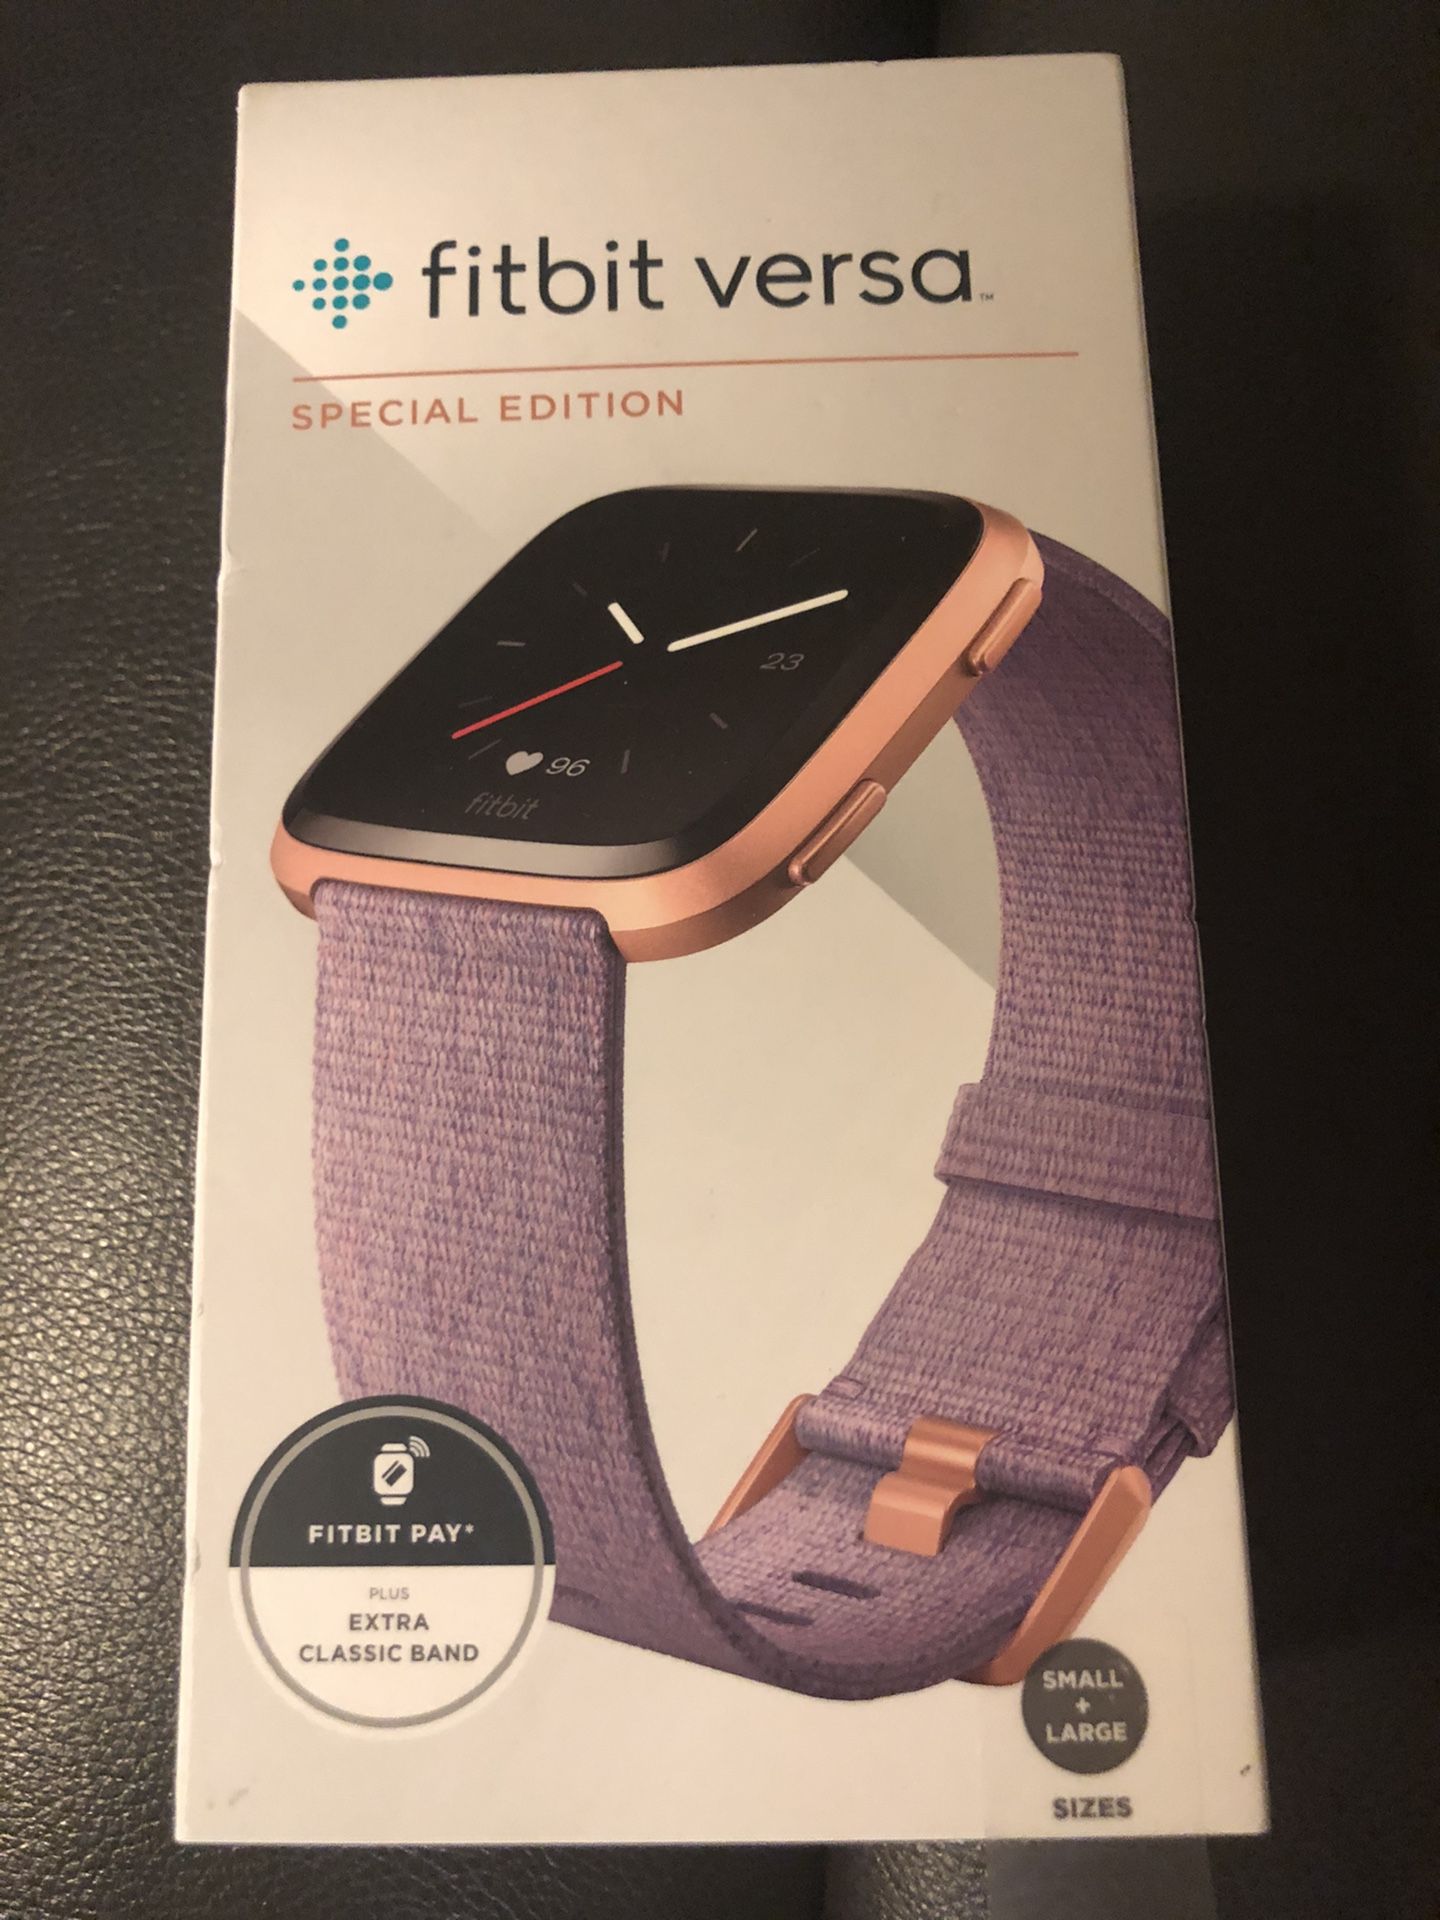 FitBit Versa special edition